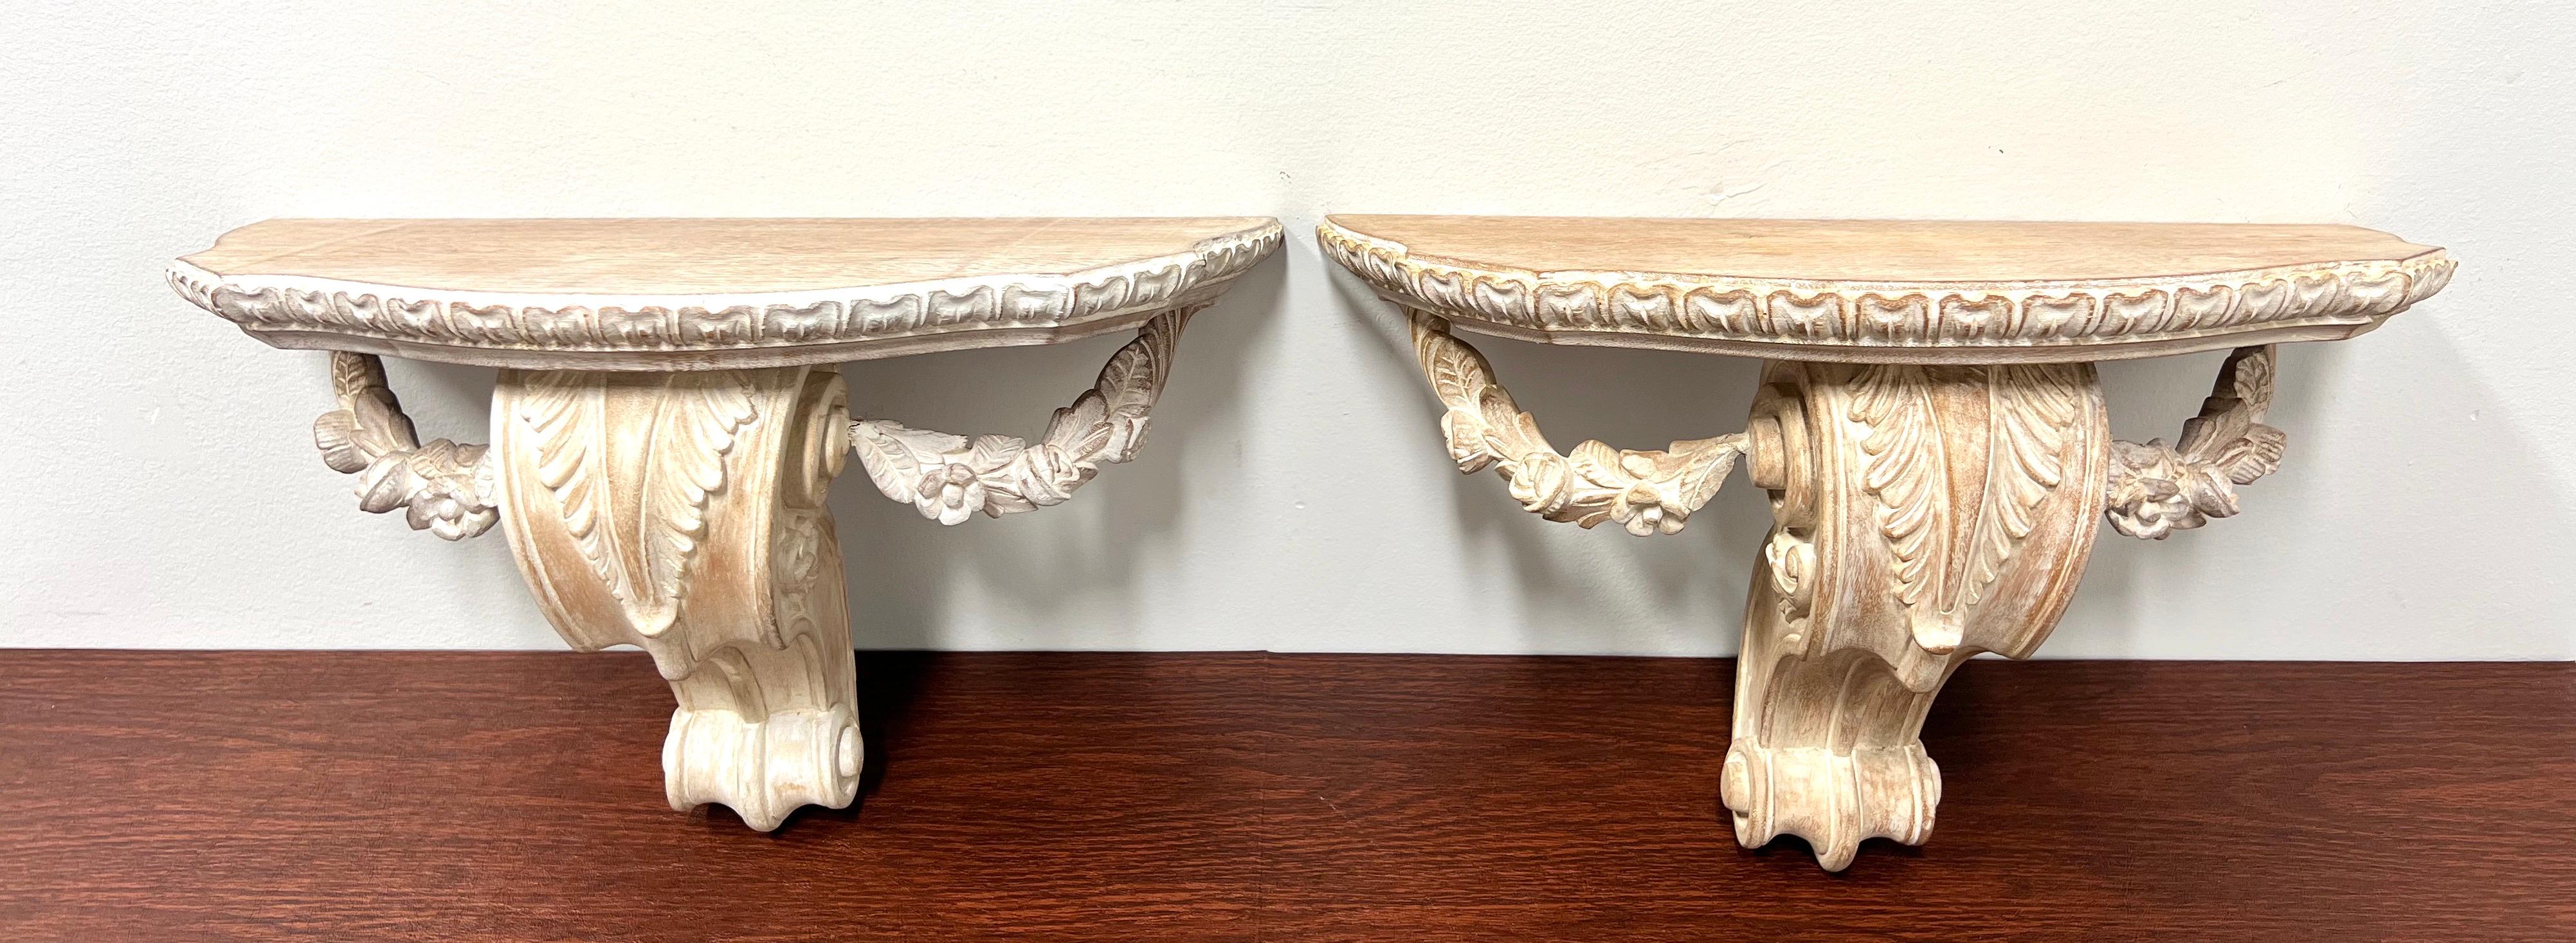 1980's Carved Whitewashed Wood Wall Bracket Shelves - Pair For Sale 3